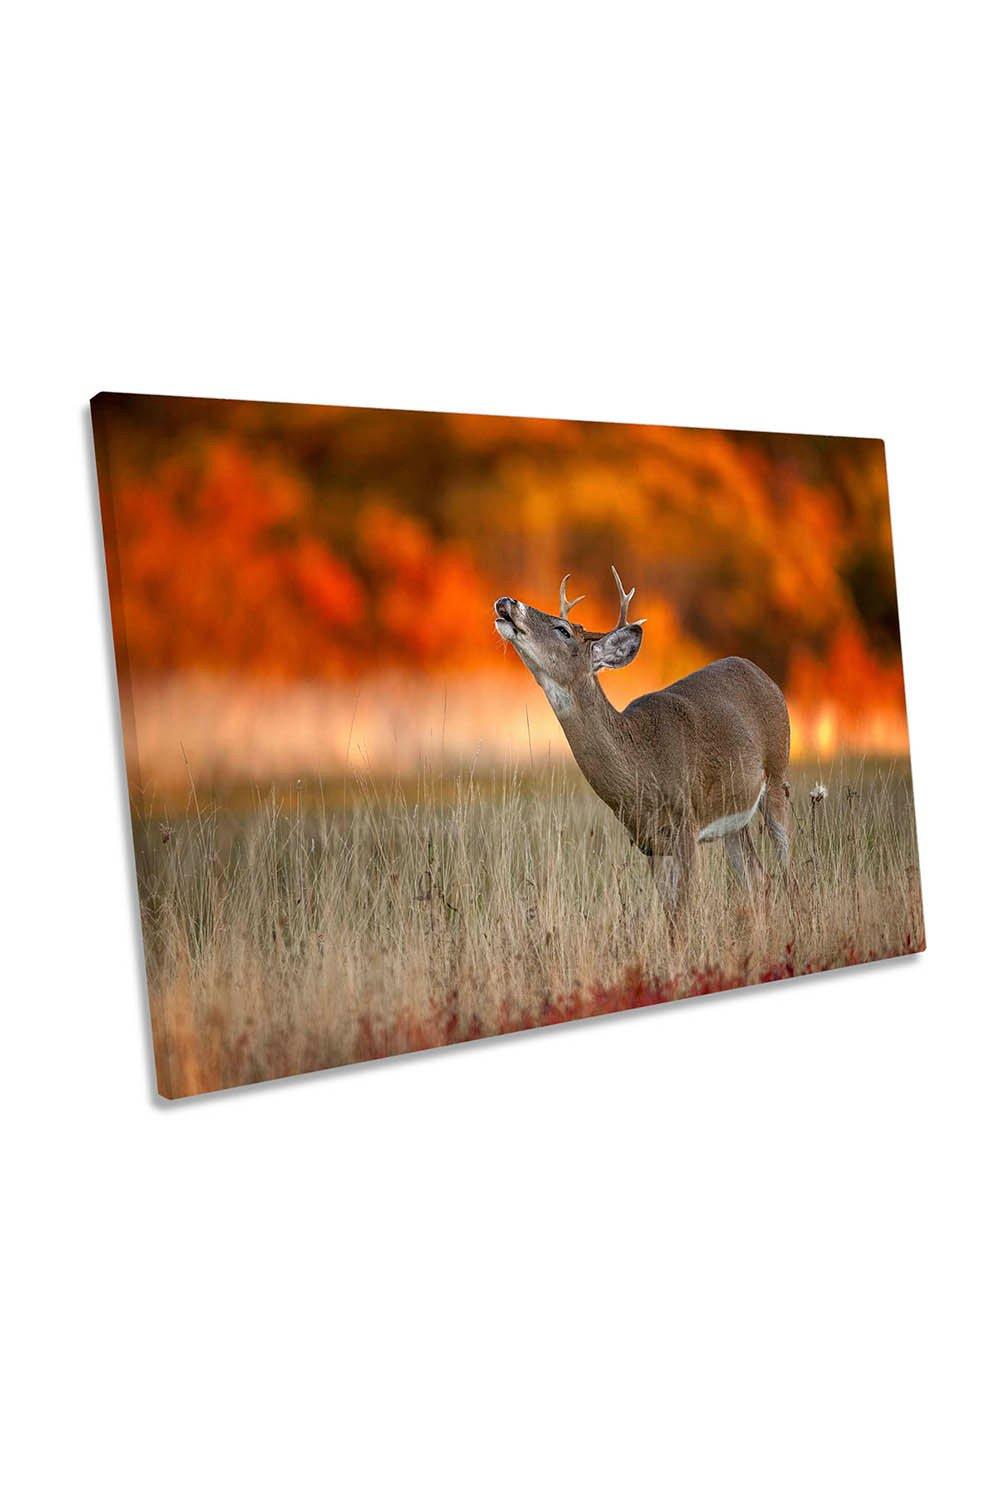 Autumn Fire Deer Stag Orange Canvas Wall Art Picture Print